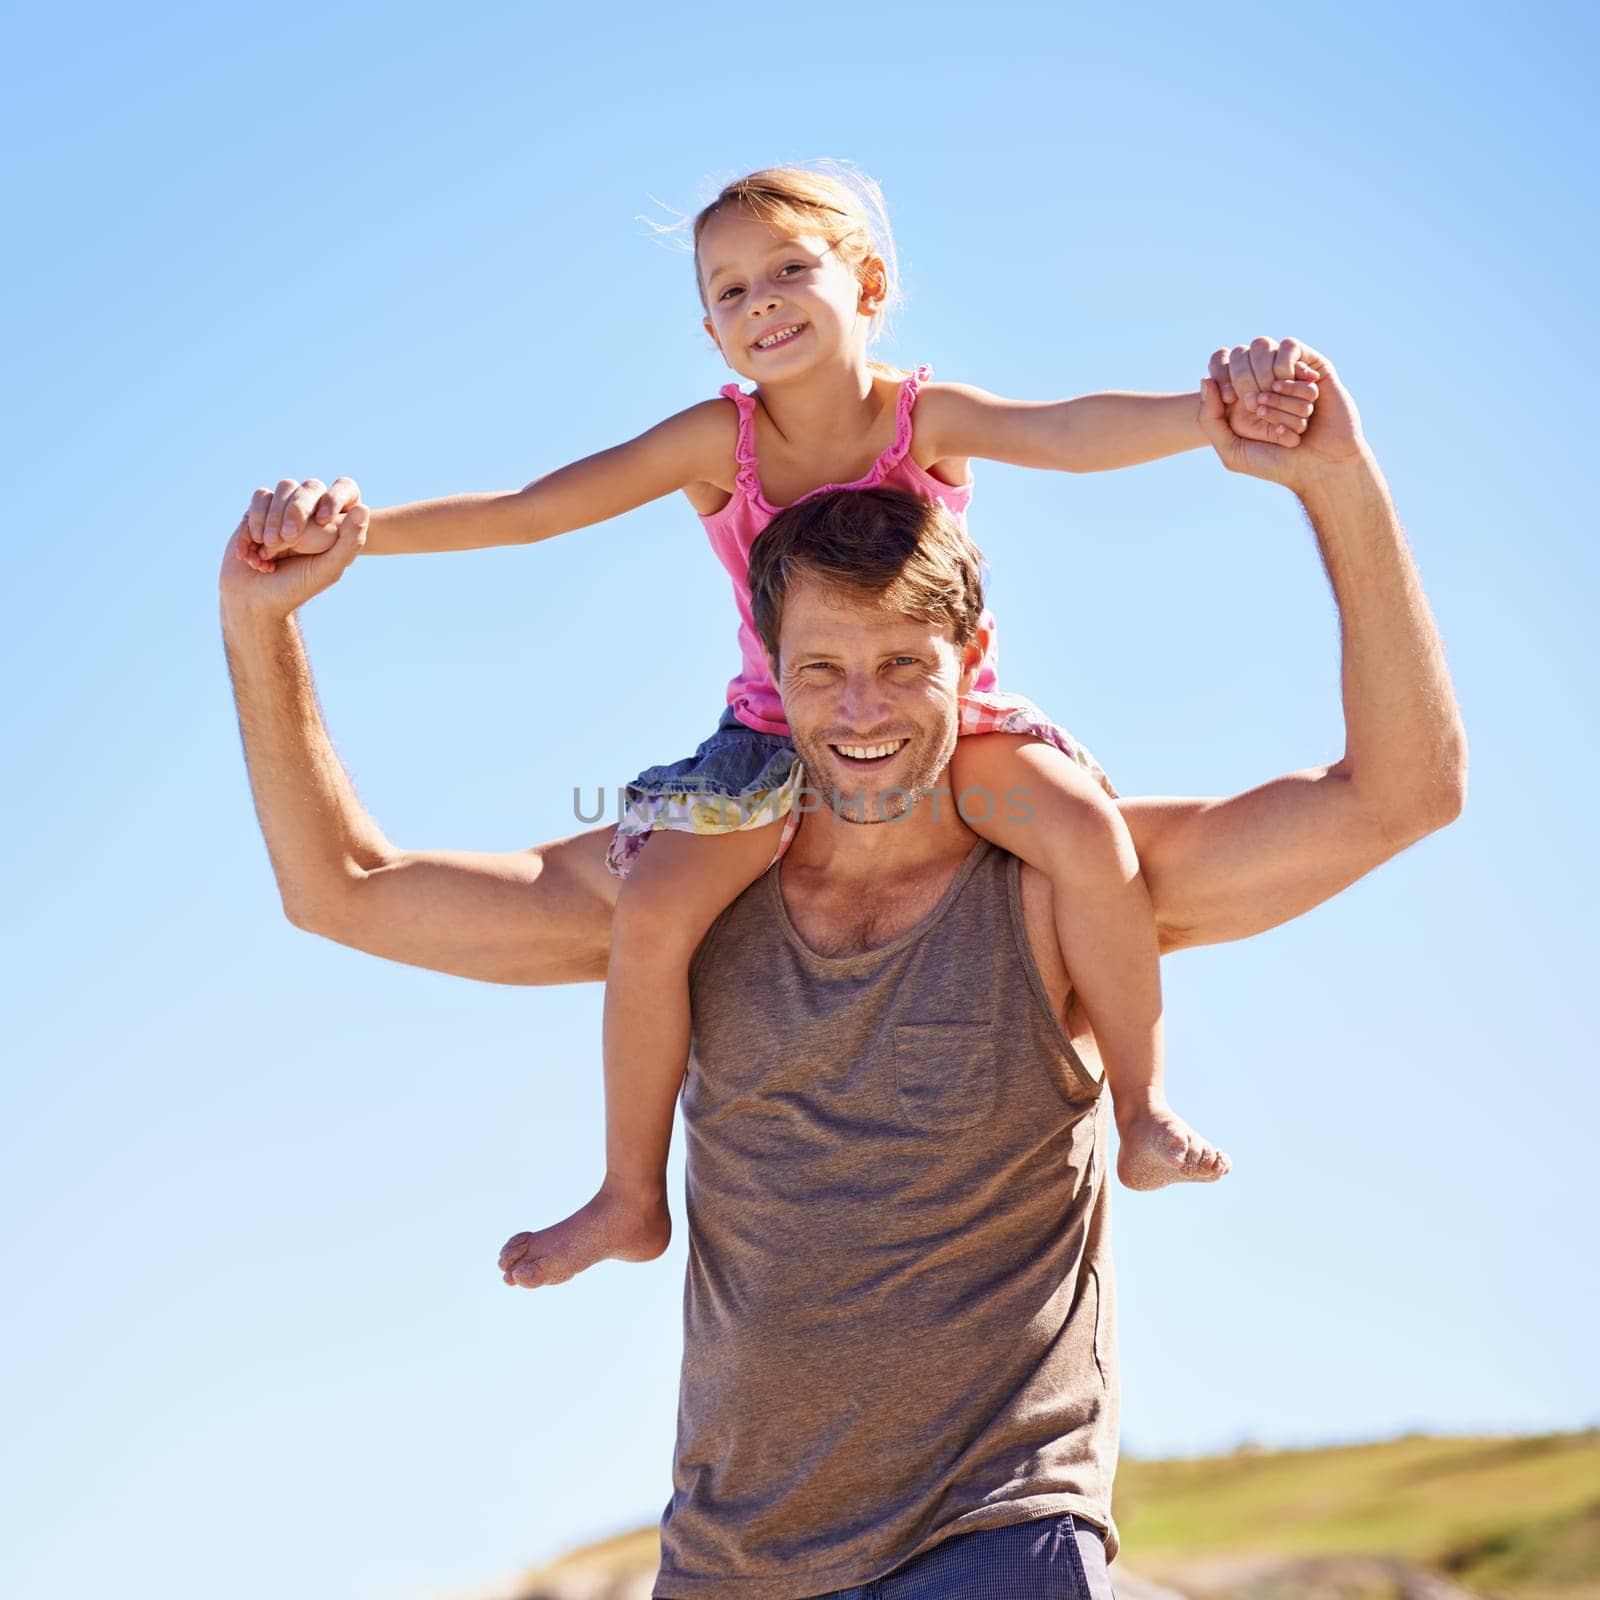 Shes on top of the world. Portrait of a handsome man giving his daughter a piggyback ride in the outdoors